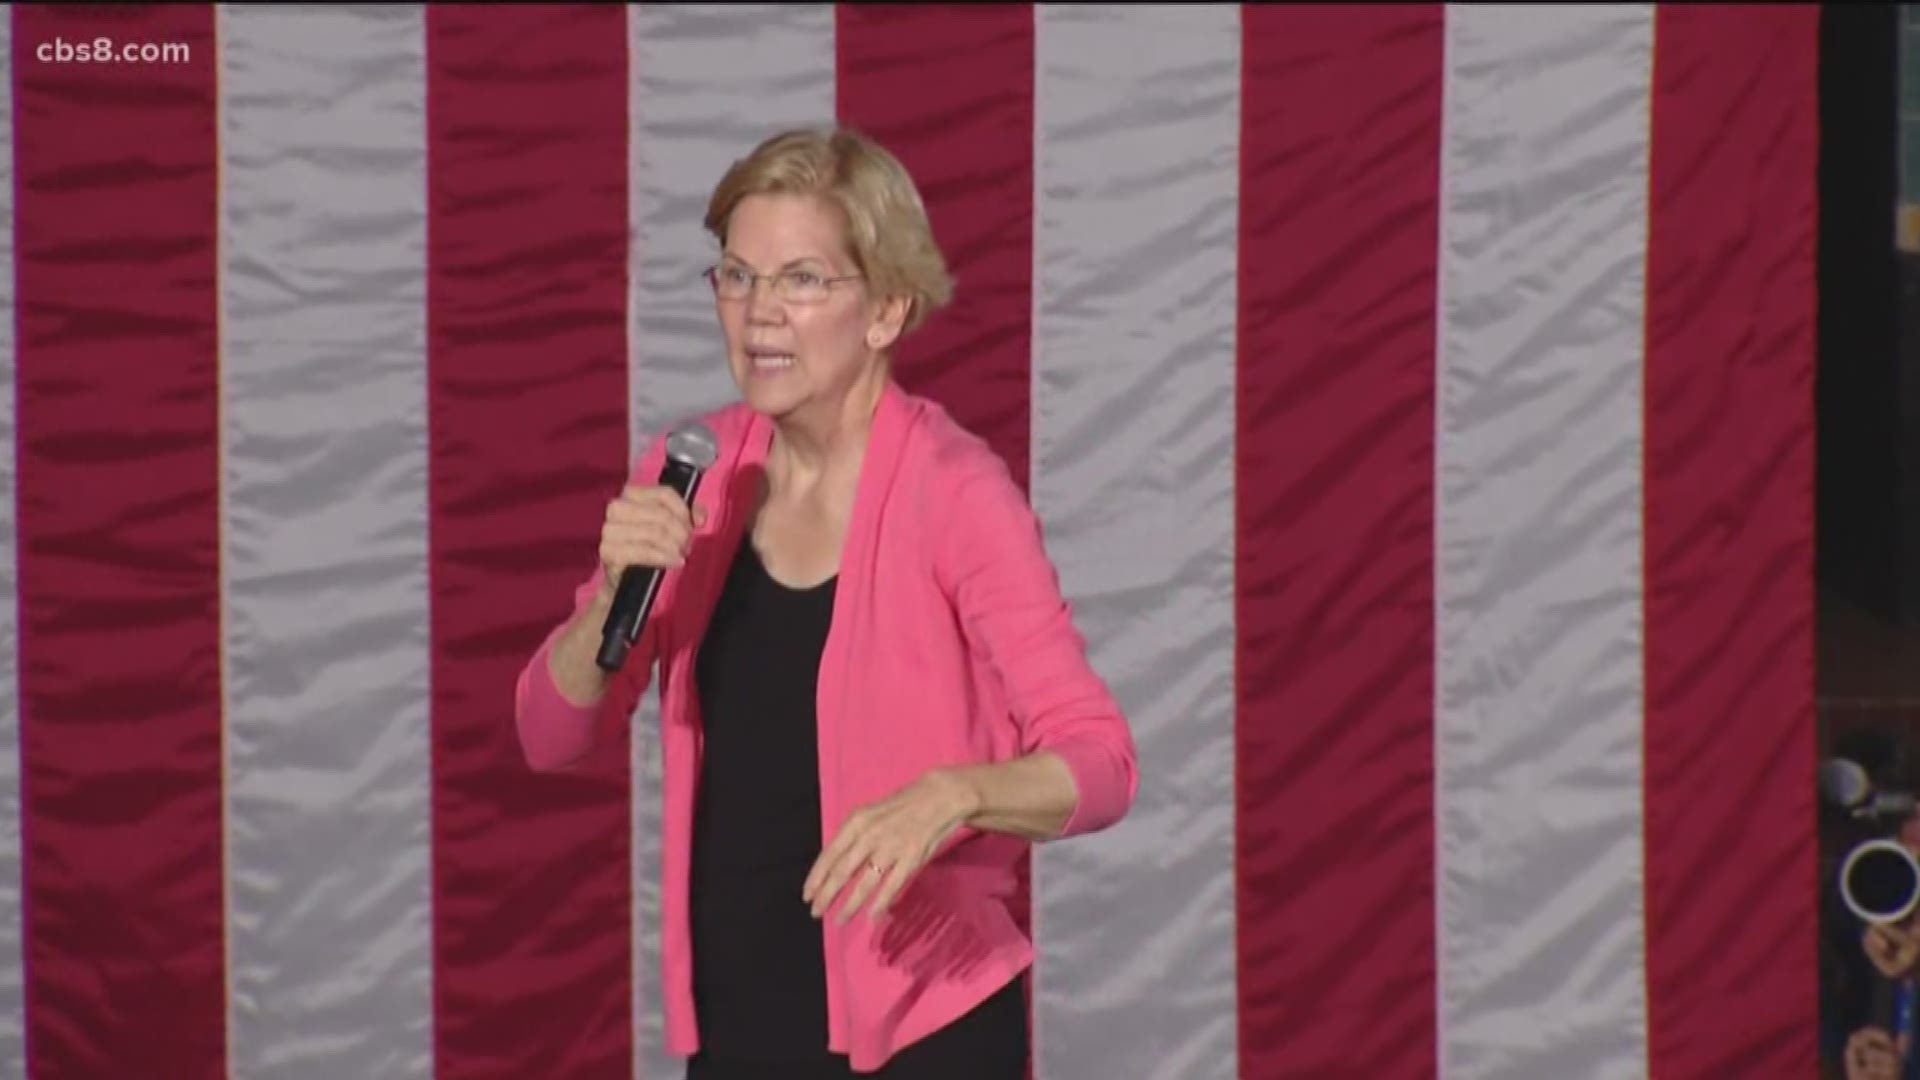 The event marked Warren's first visit to San Diego County since formally launching her campaign in February.